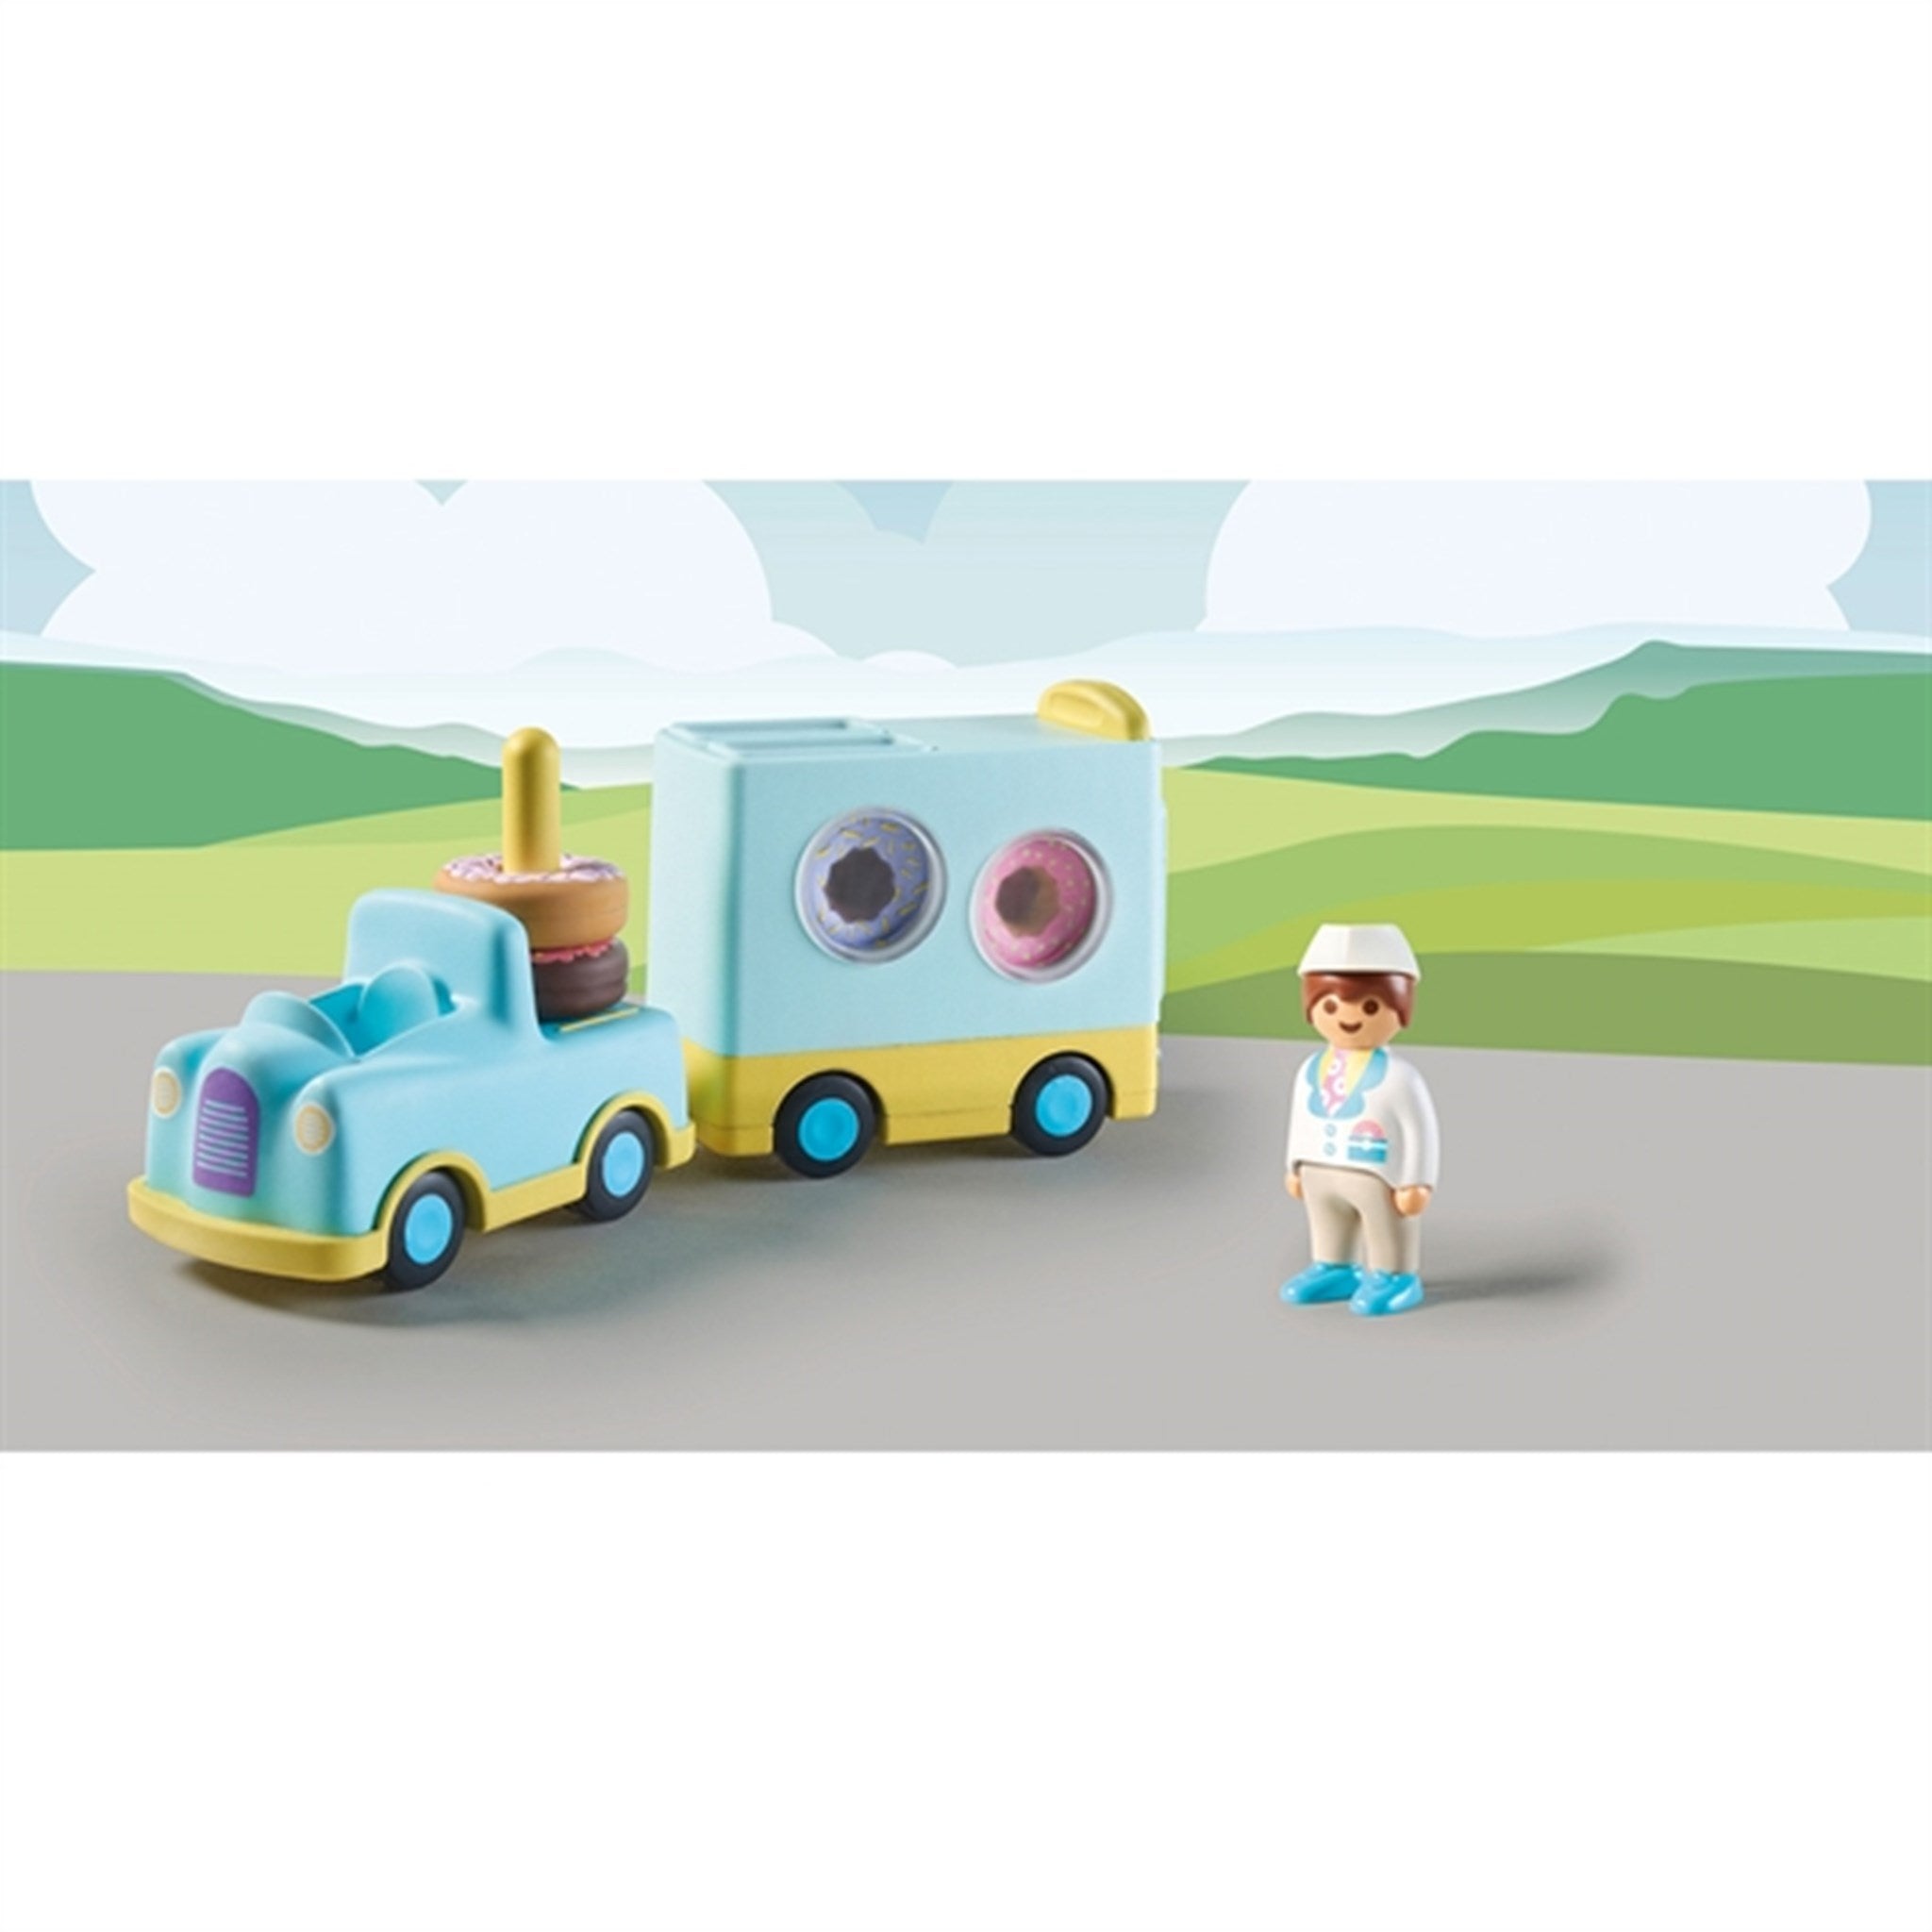 Playmobil® 1.2.3 - Crazy Donut Truck with Stacking and Sorting Feature 4